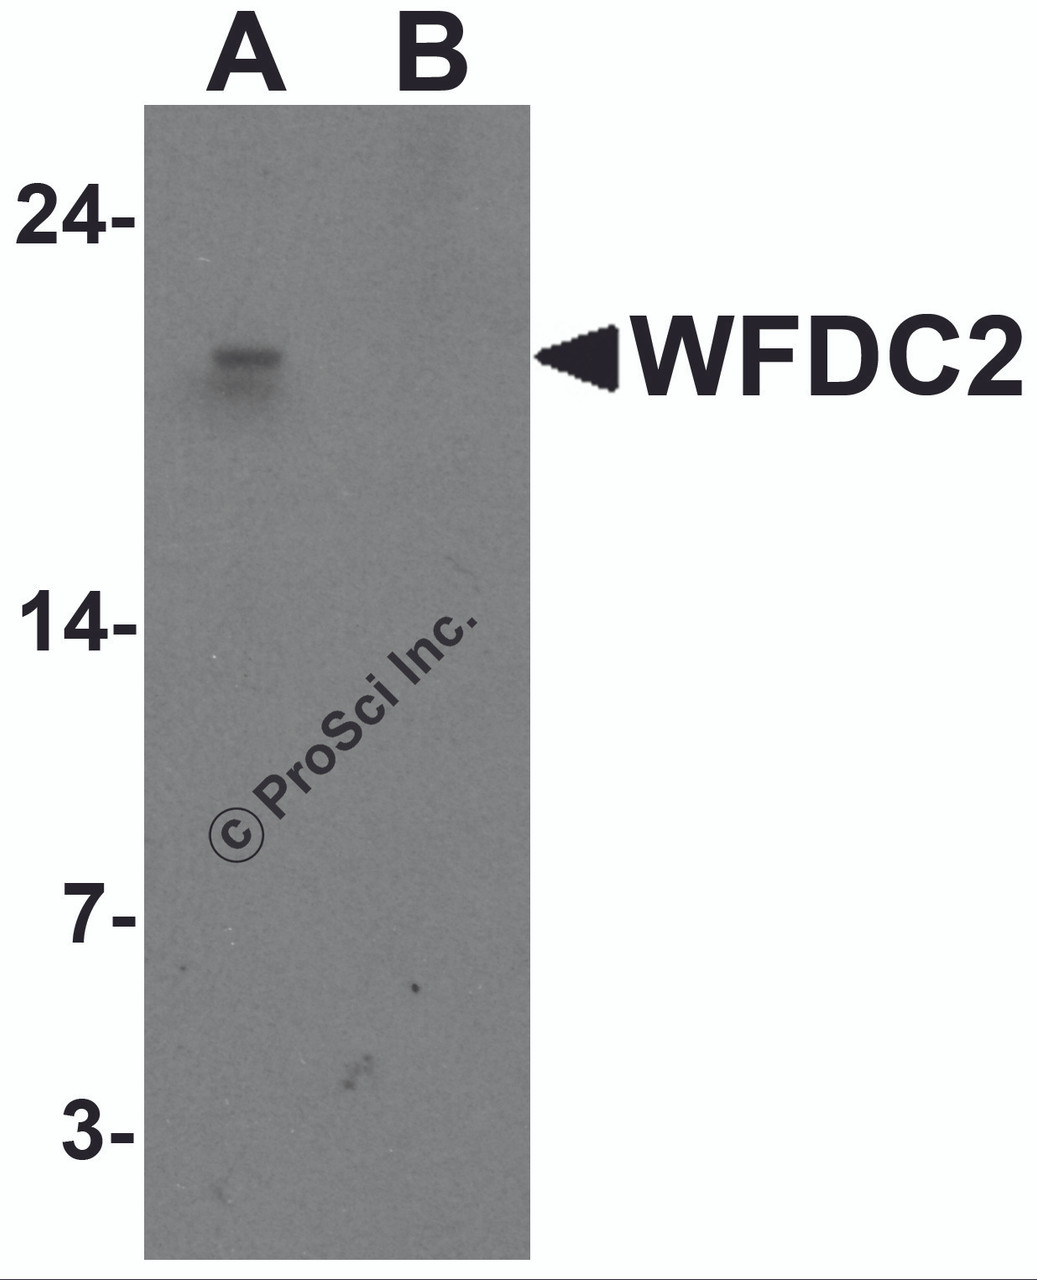 Western blot analysis of WFDC2 in A549 cell lysate with WFDC2 antibody at 1 &#956;g/ml in (A) the absence and (B) the presence of blocking peptide.